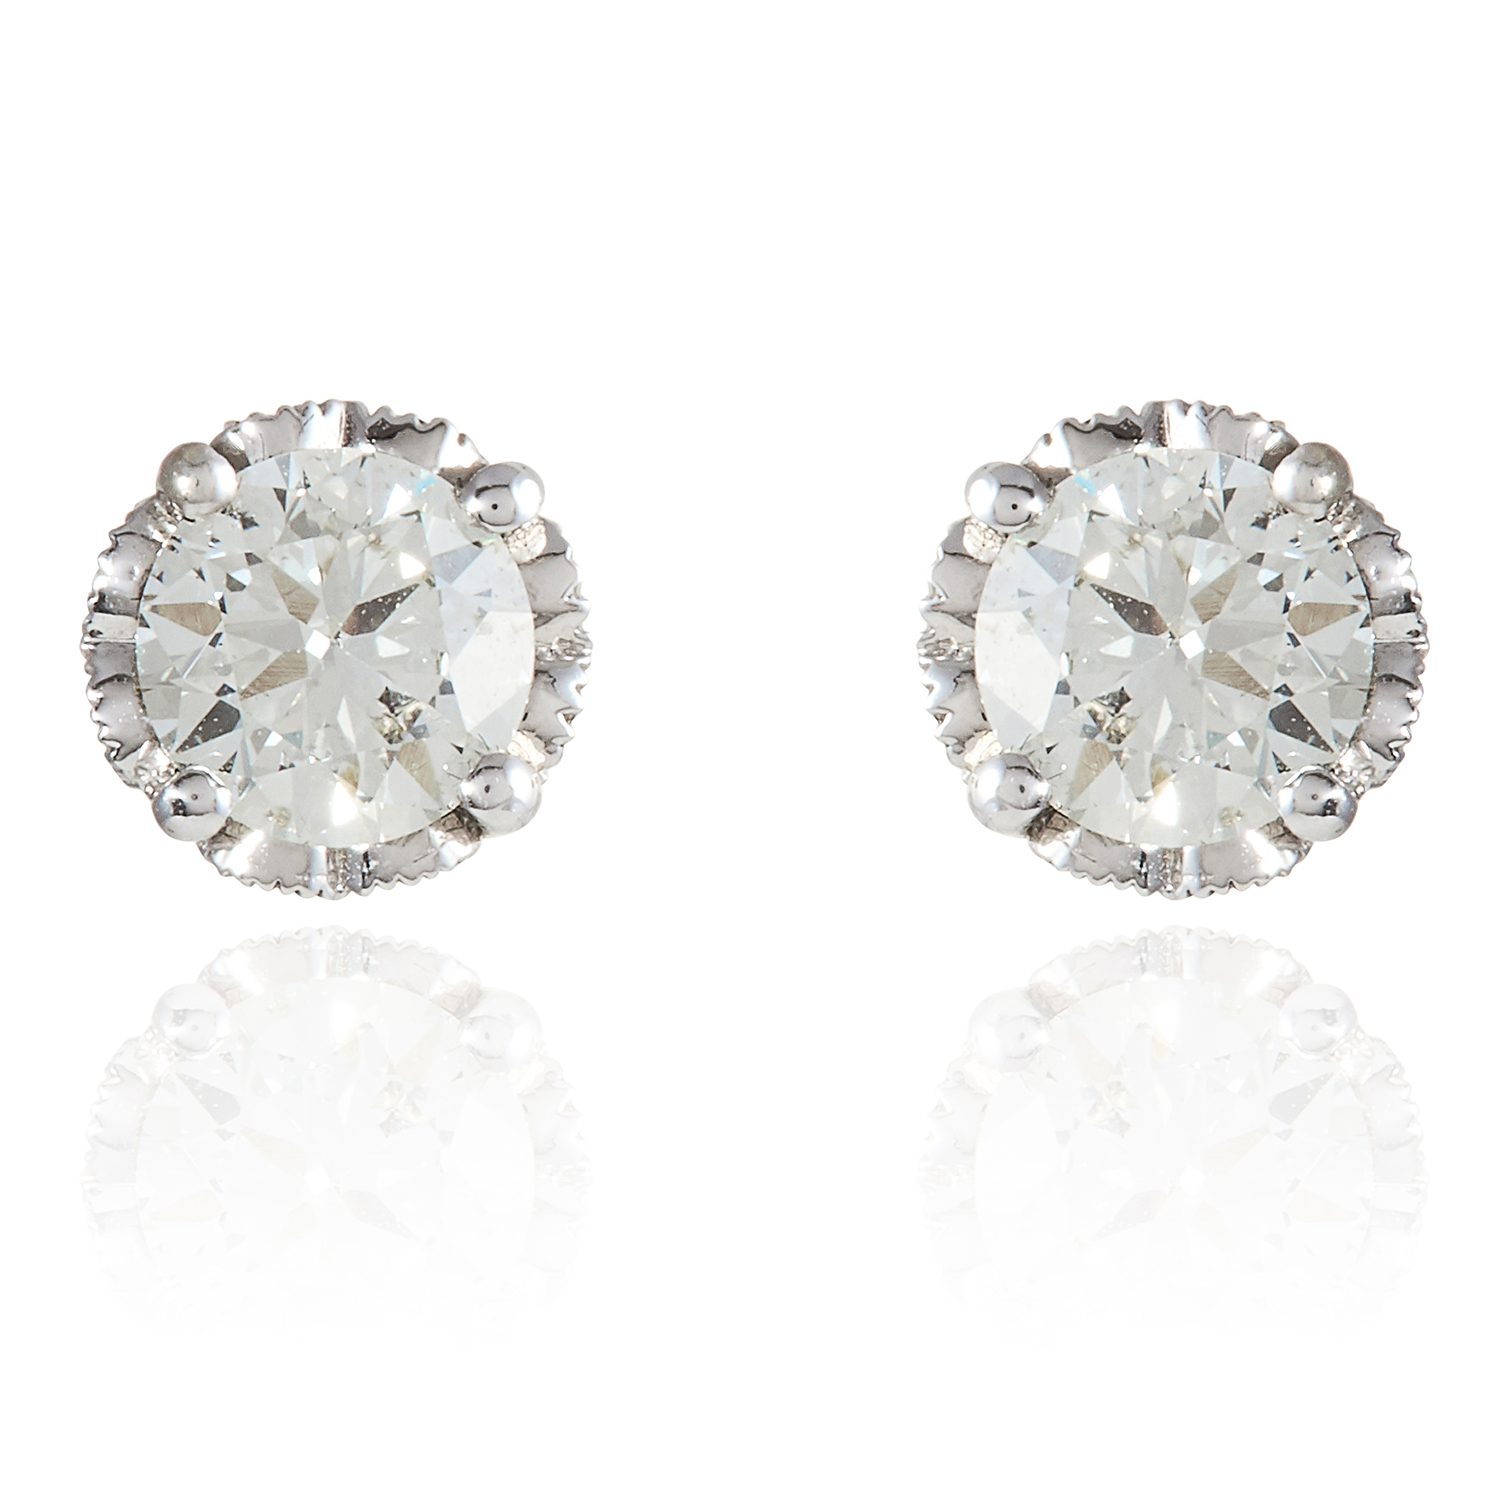 A PAIR OF DIAMOND EAR STUDS in 18ct white gold, set with round cut diamonds totalling